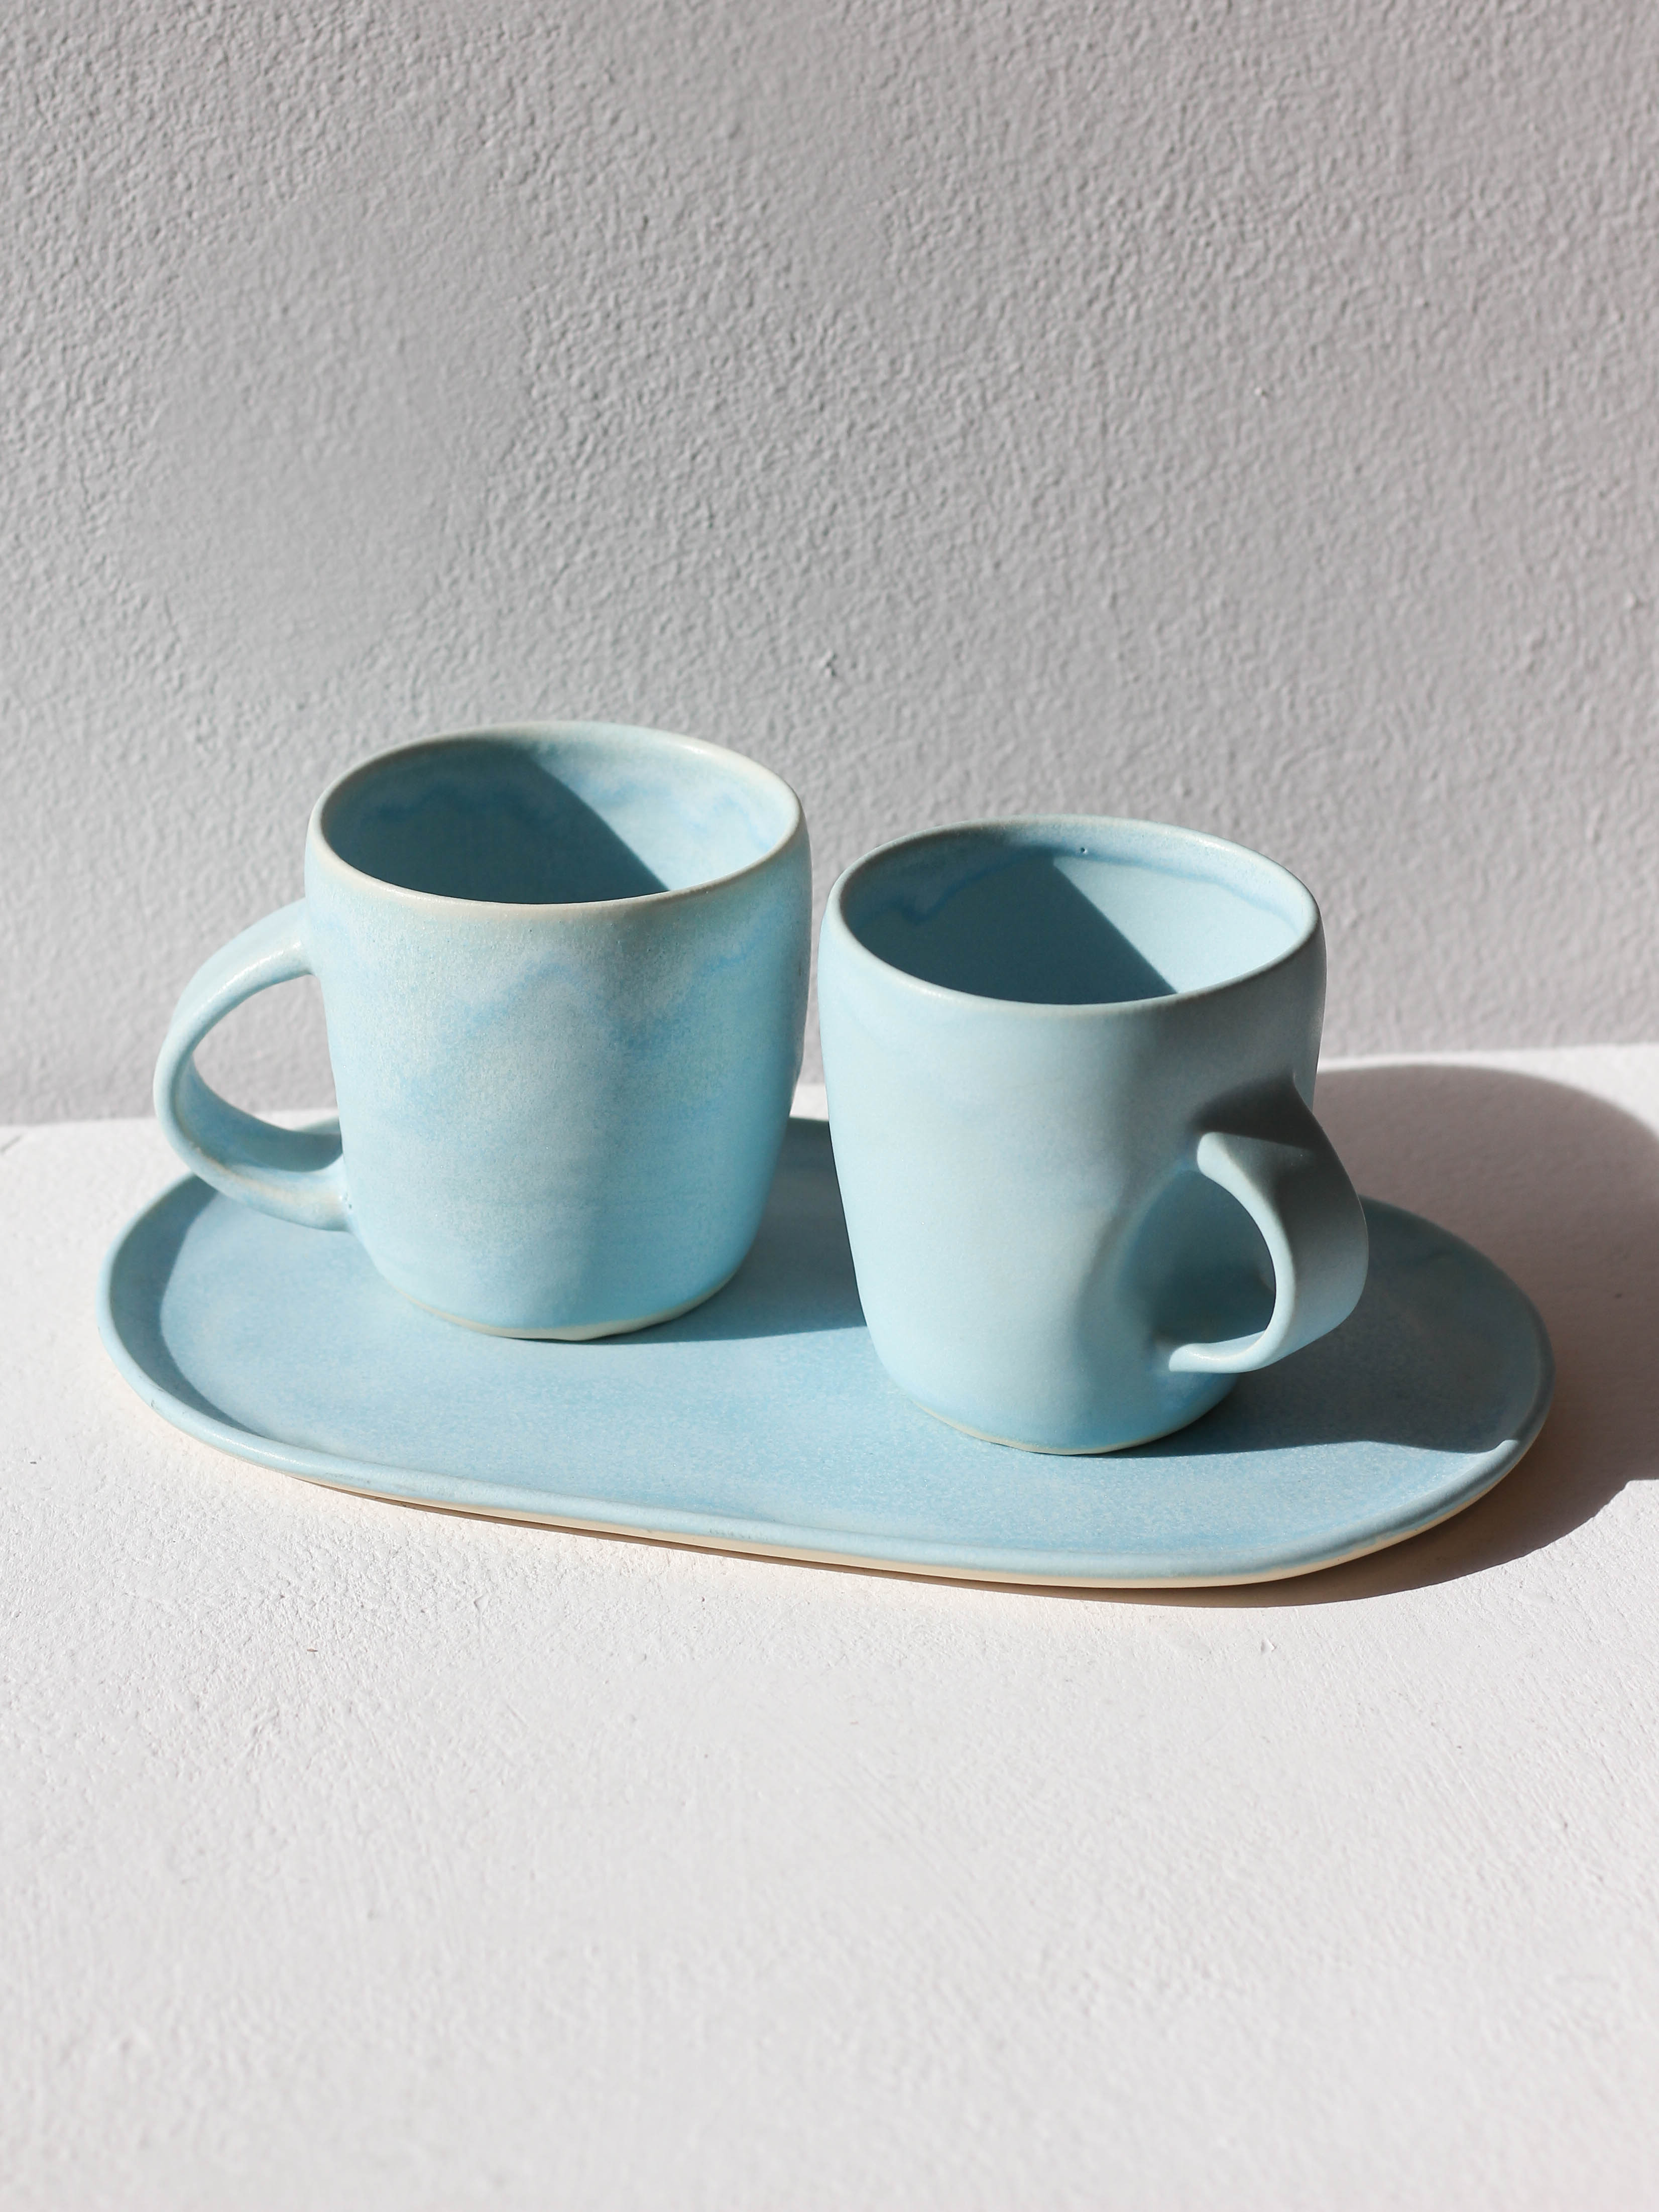 Soft and supple ceramic ware by Lynne Tan, $40-$50